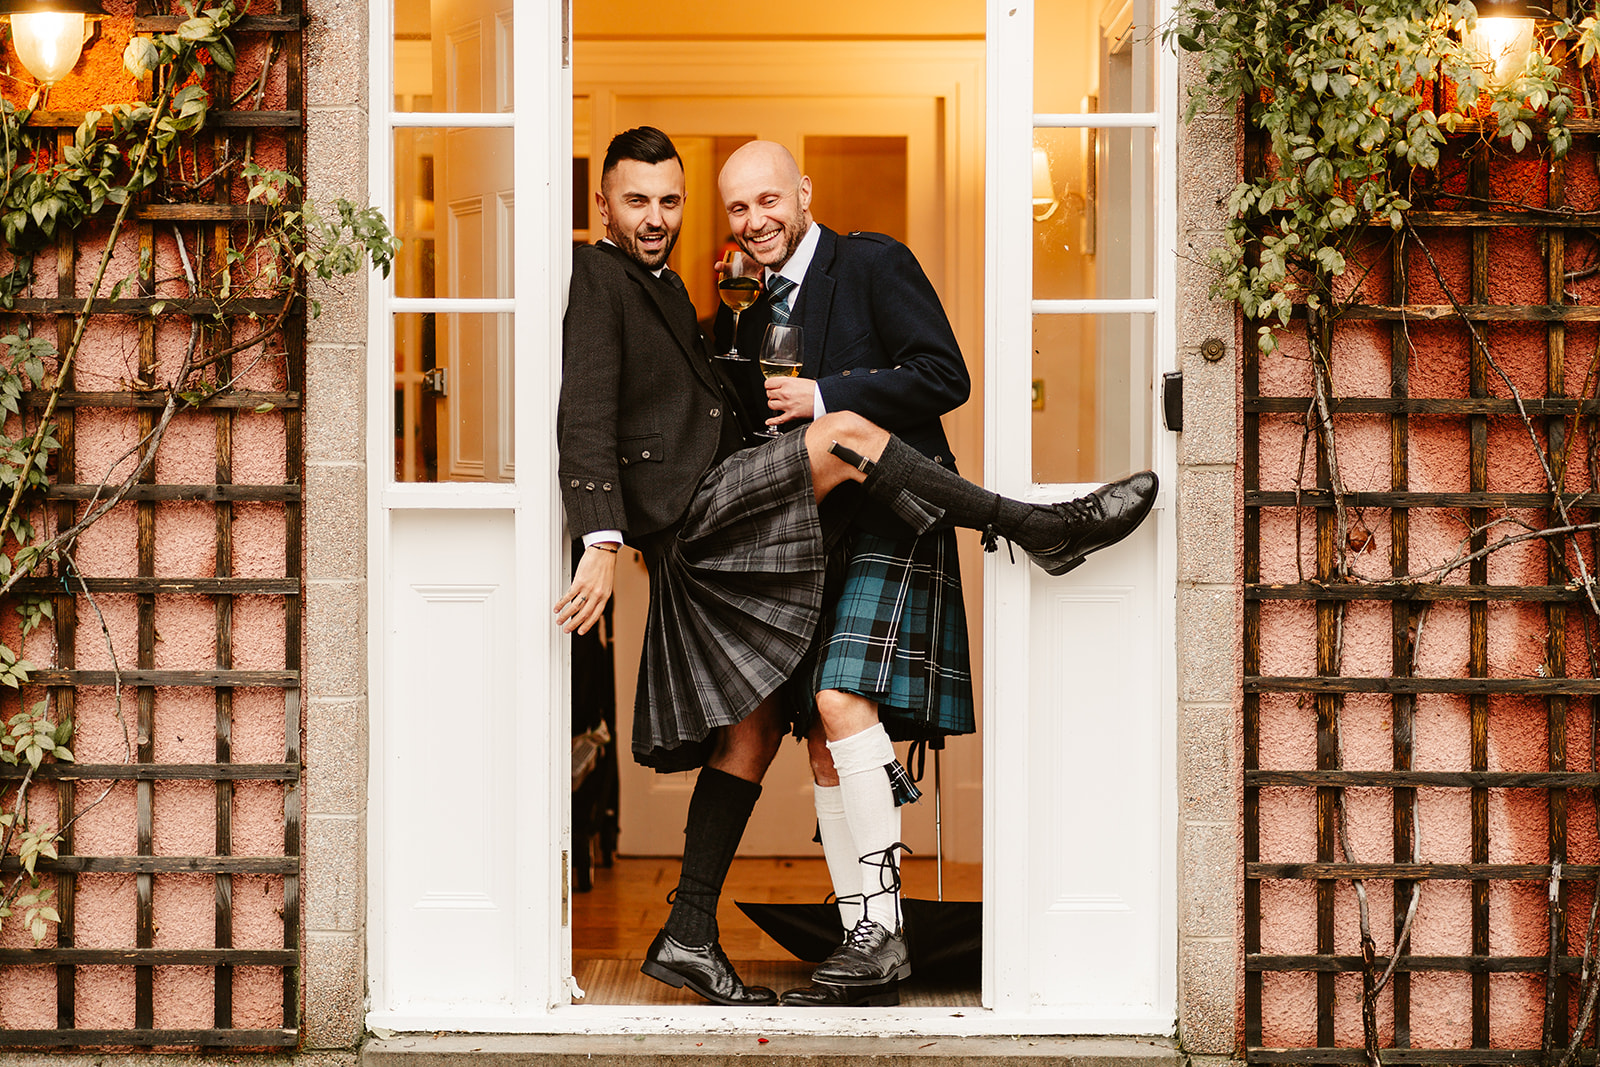 Wedding guests having fun at ballogie house captured by Aberdeen wedding photographed Danielle Leslie Photography